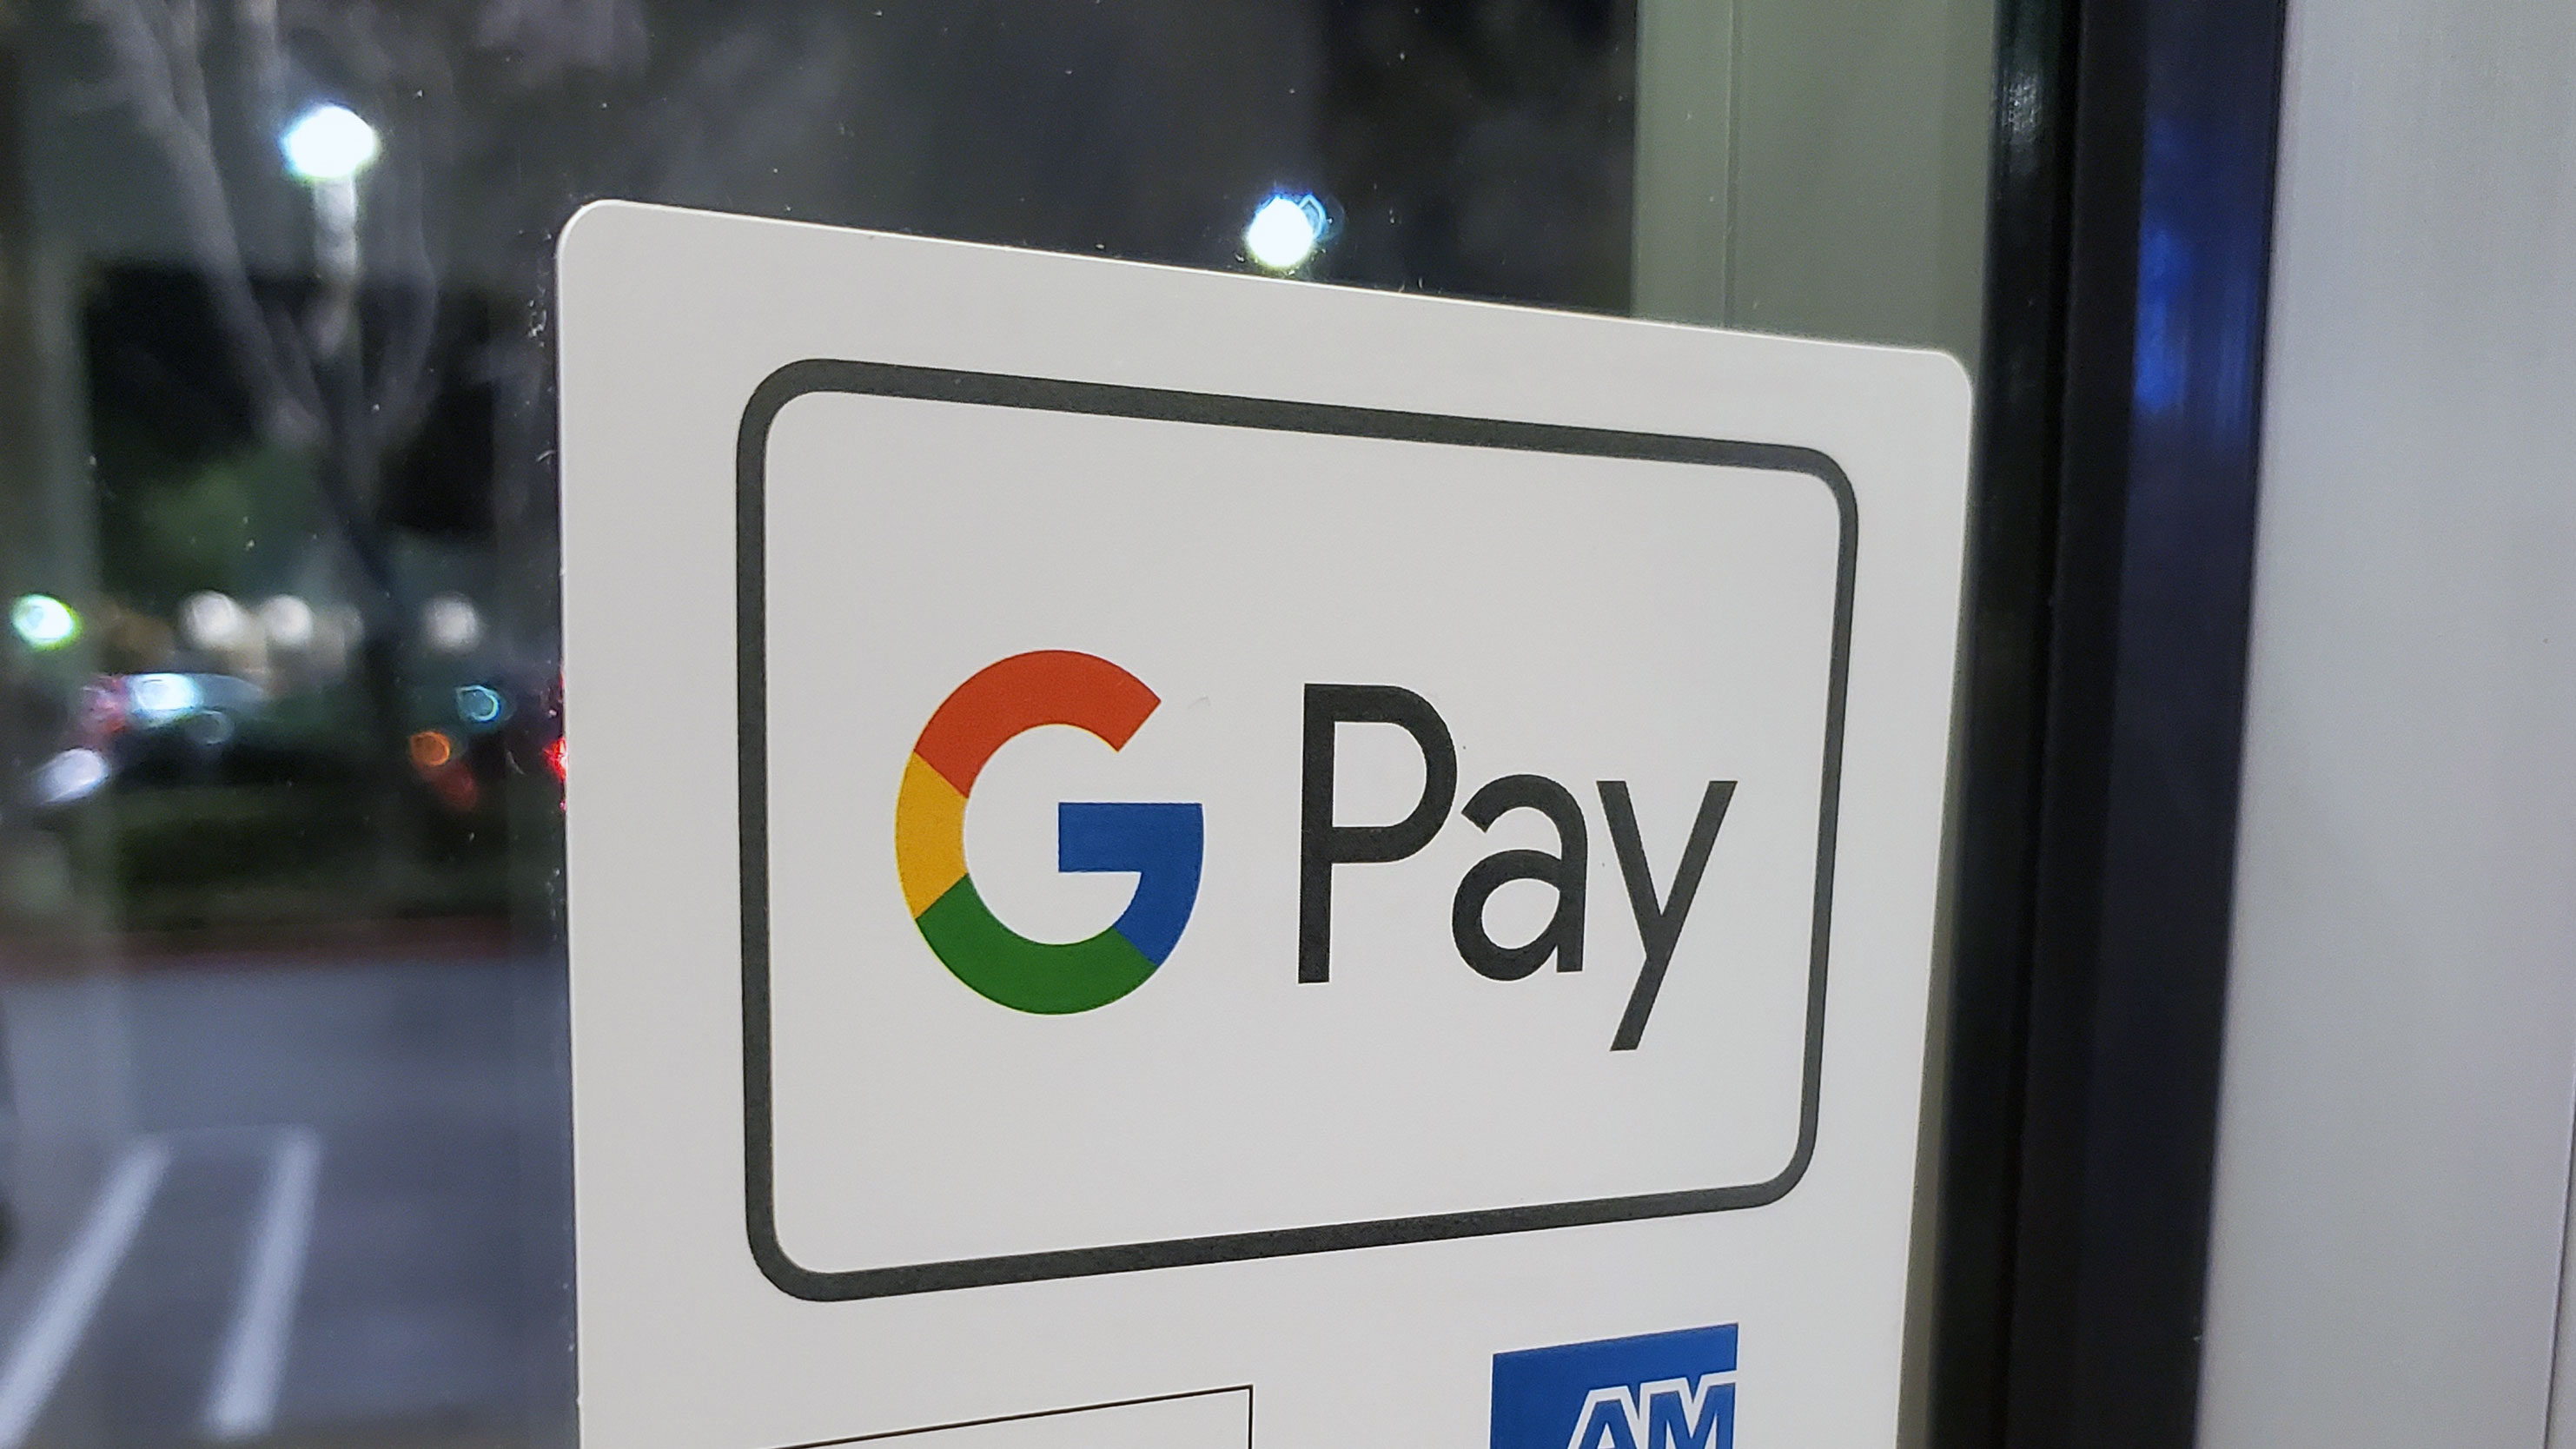 Google Pay US users can now send money to users in India and Singapore |  TechCrunch